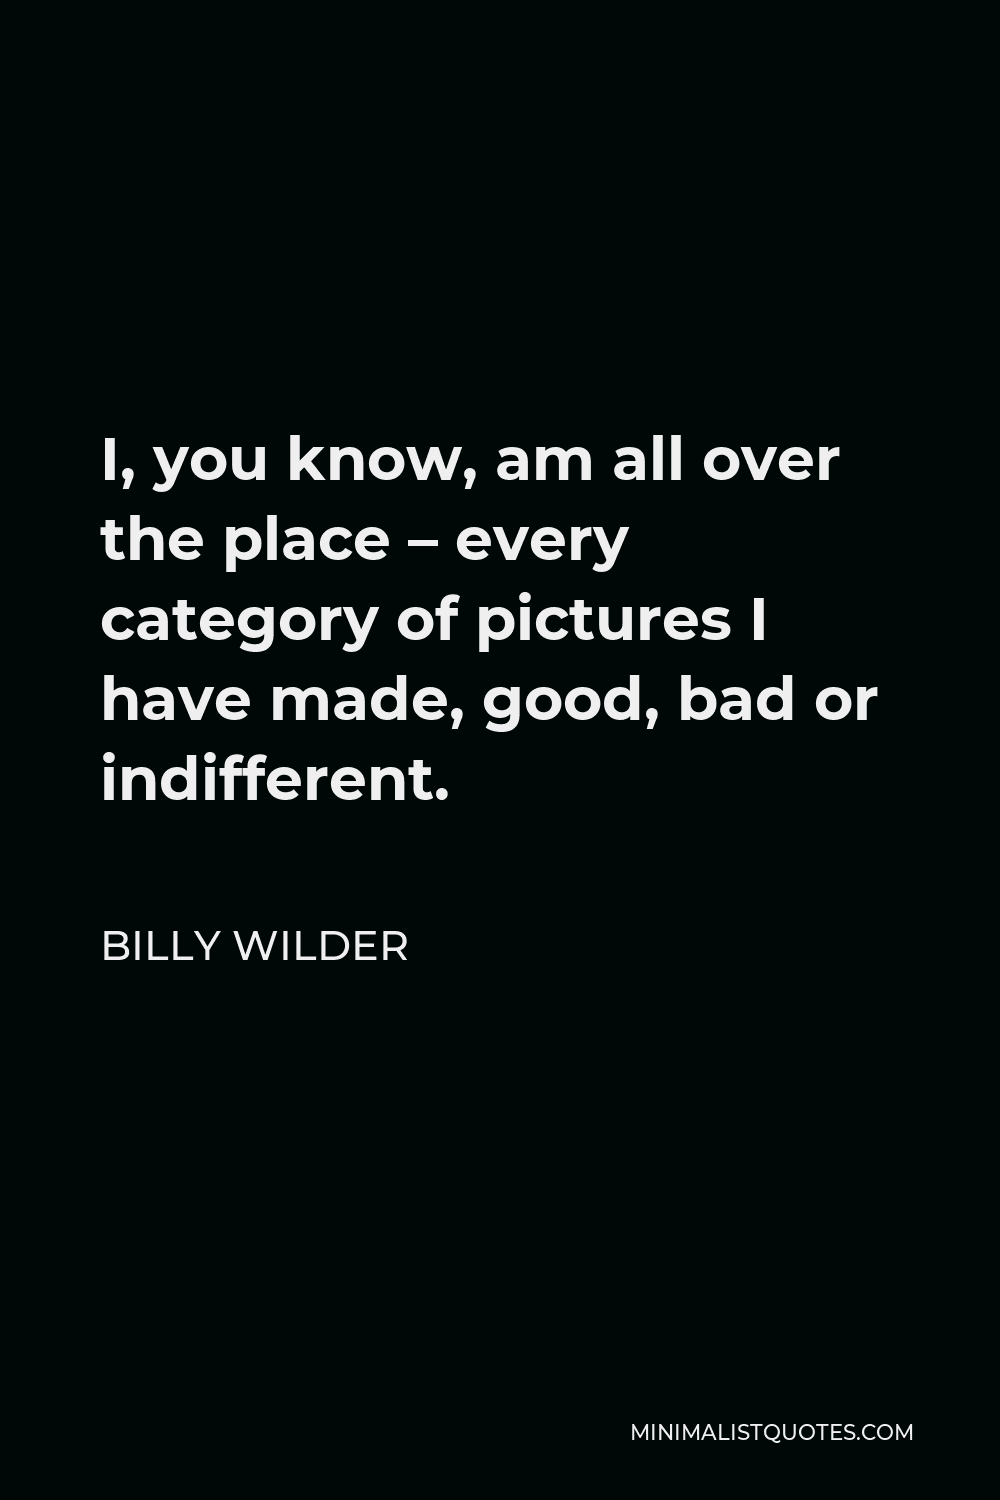 Billy Wilder Quote - I, you know, am all over the place – every category of pictures I have made, good, bad or indifferent.